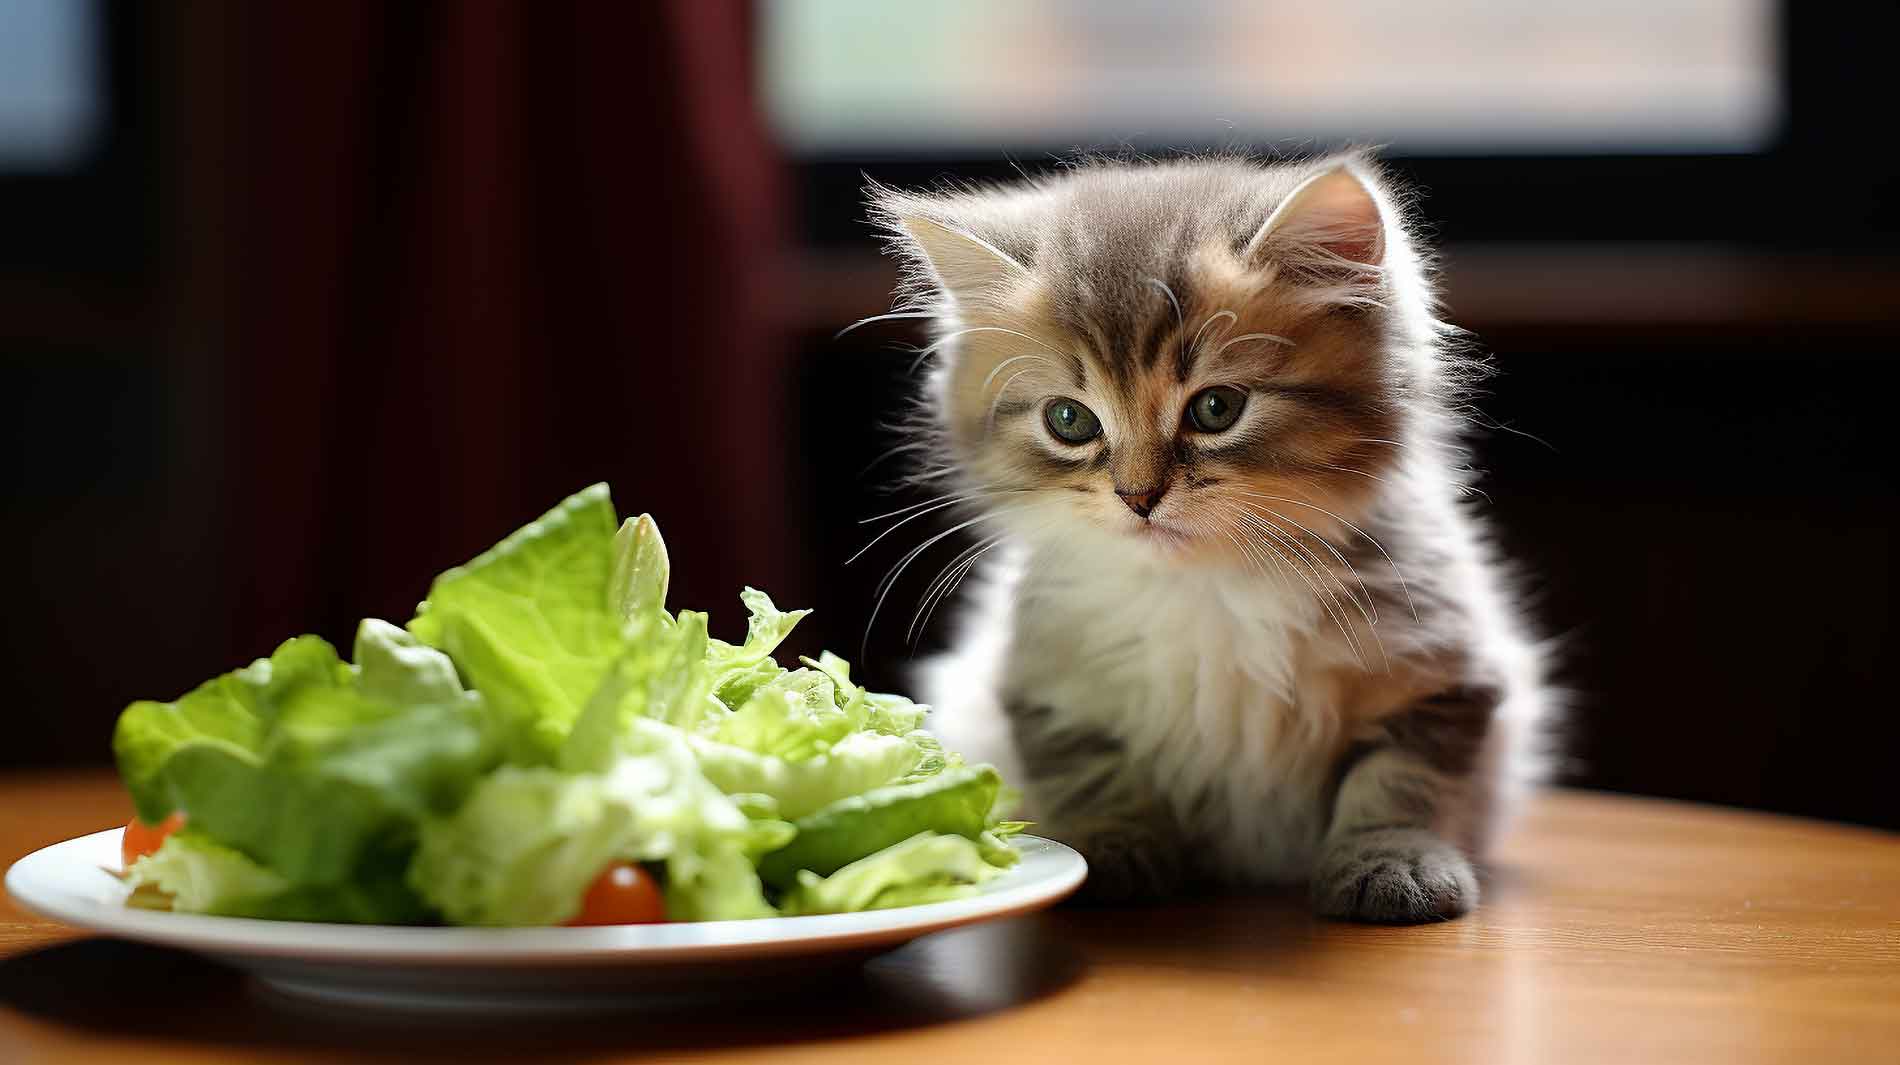 Disappointed kitten sitting in front of salad